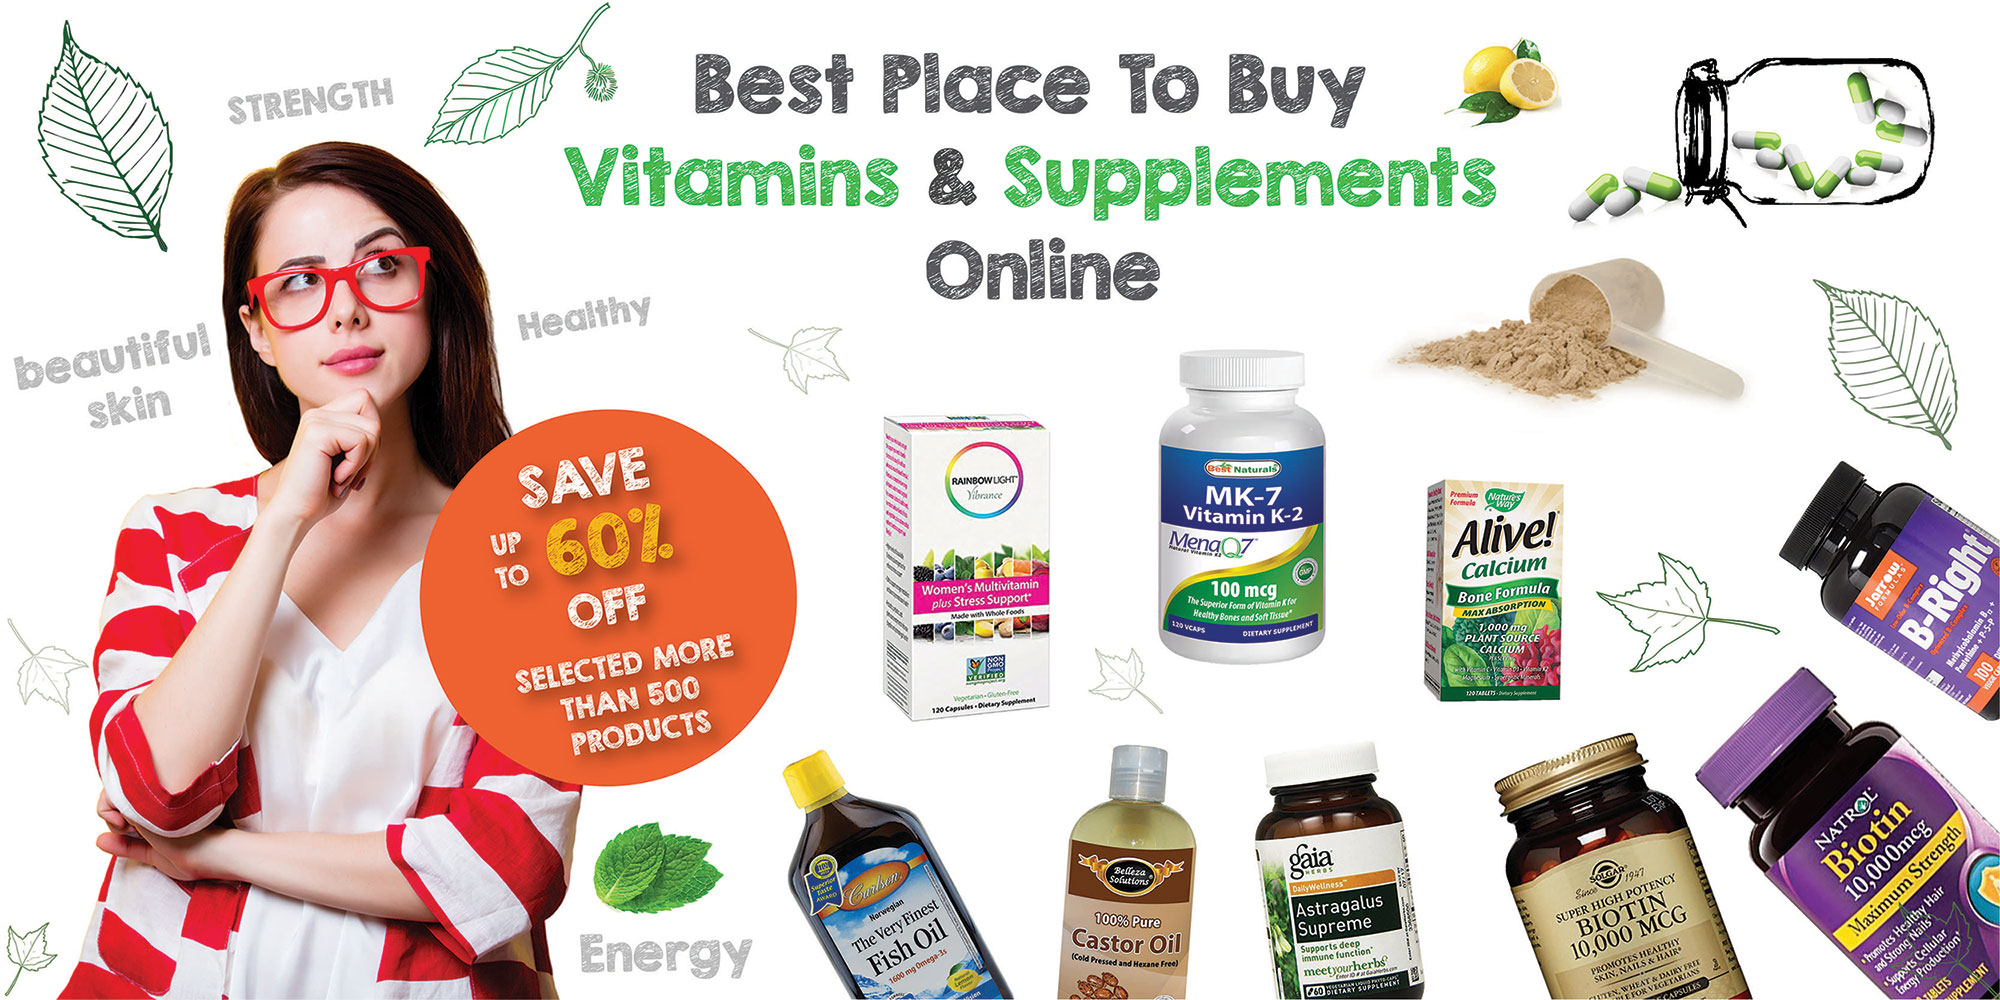 "Buy Discount Offer On vitamins ABCD,  protein Supplements, Minerals, Calcium, cromium AHCC, Antioxidant Product at low prices in US | novanutritions.com
"